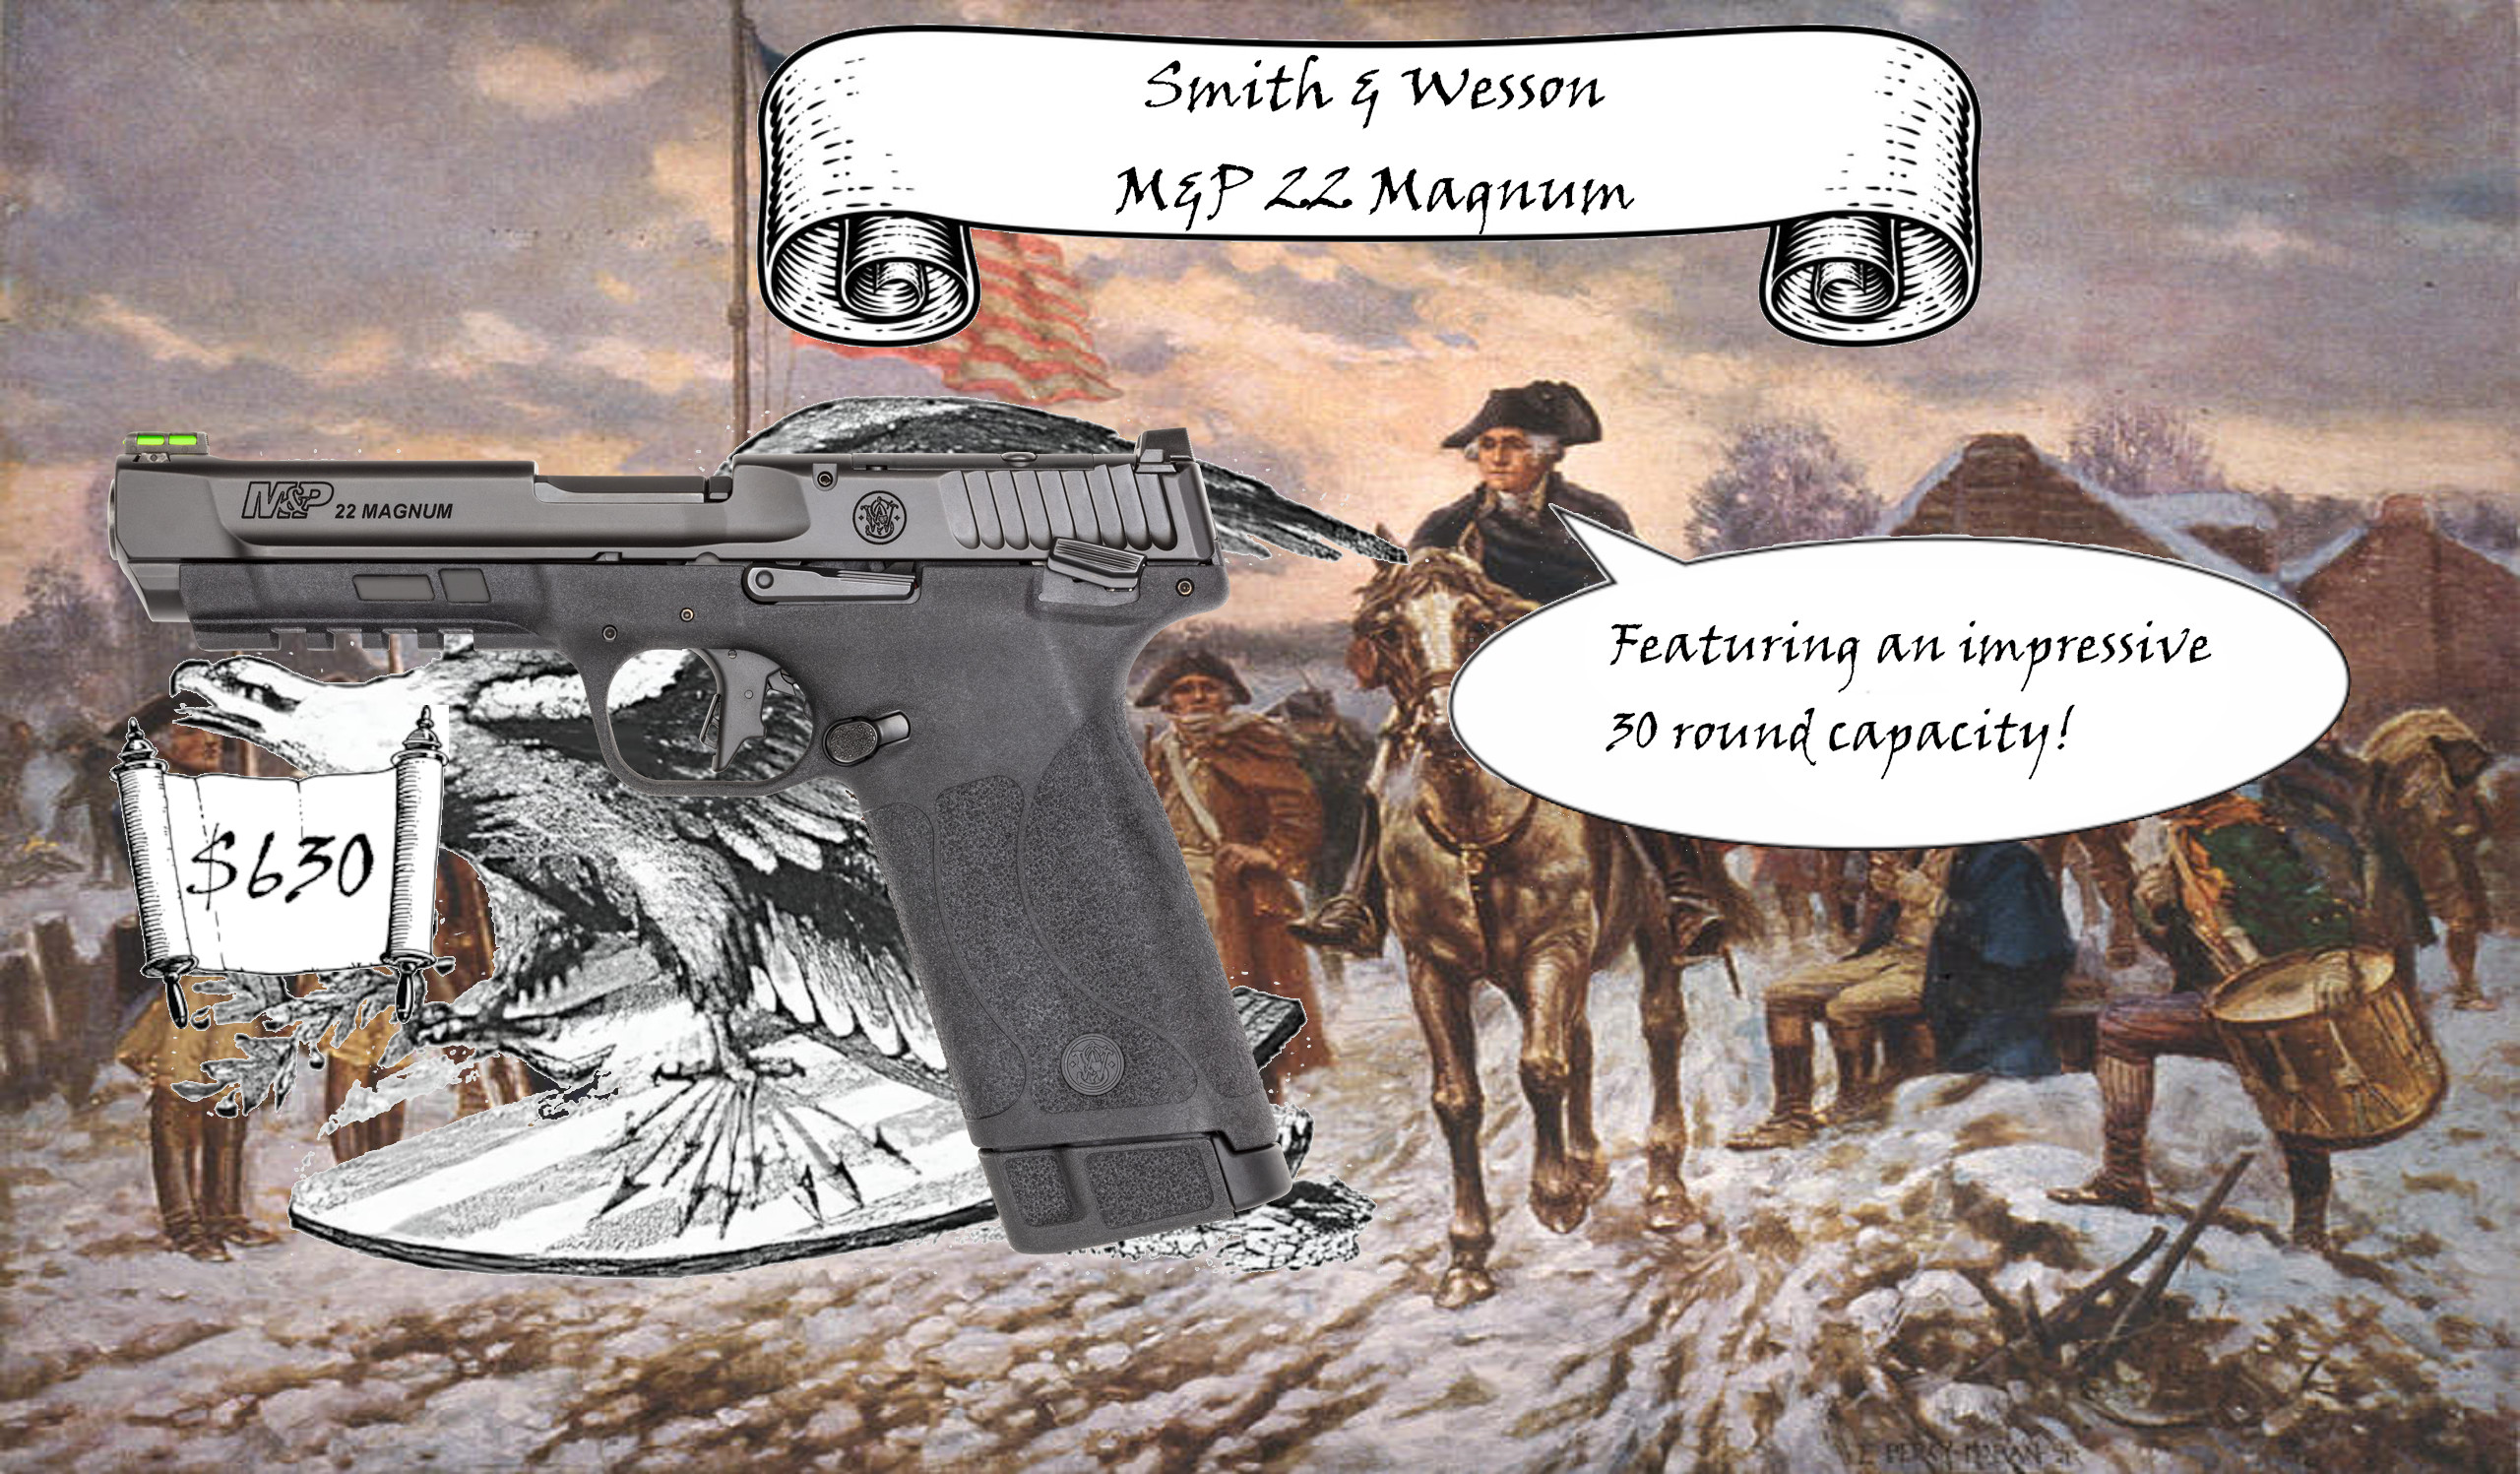 https://www.continental-armory.com/products/smith-wesson-13433-022188892932-6229